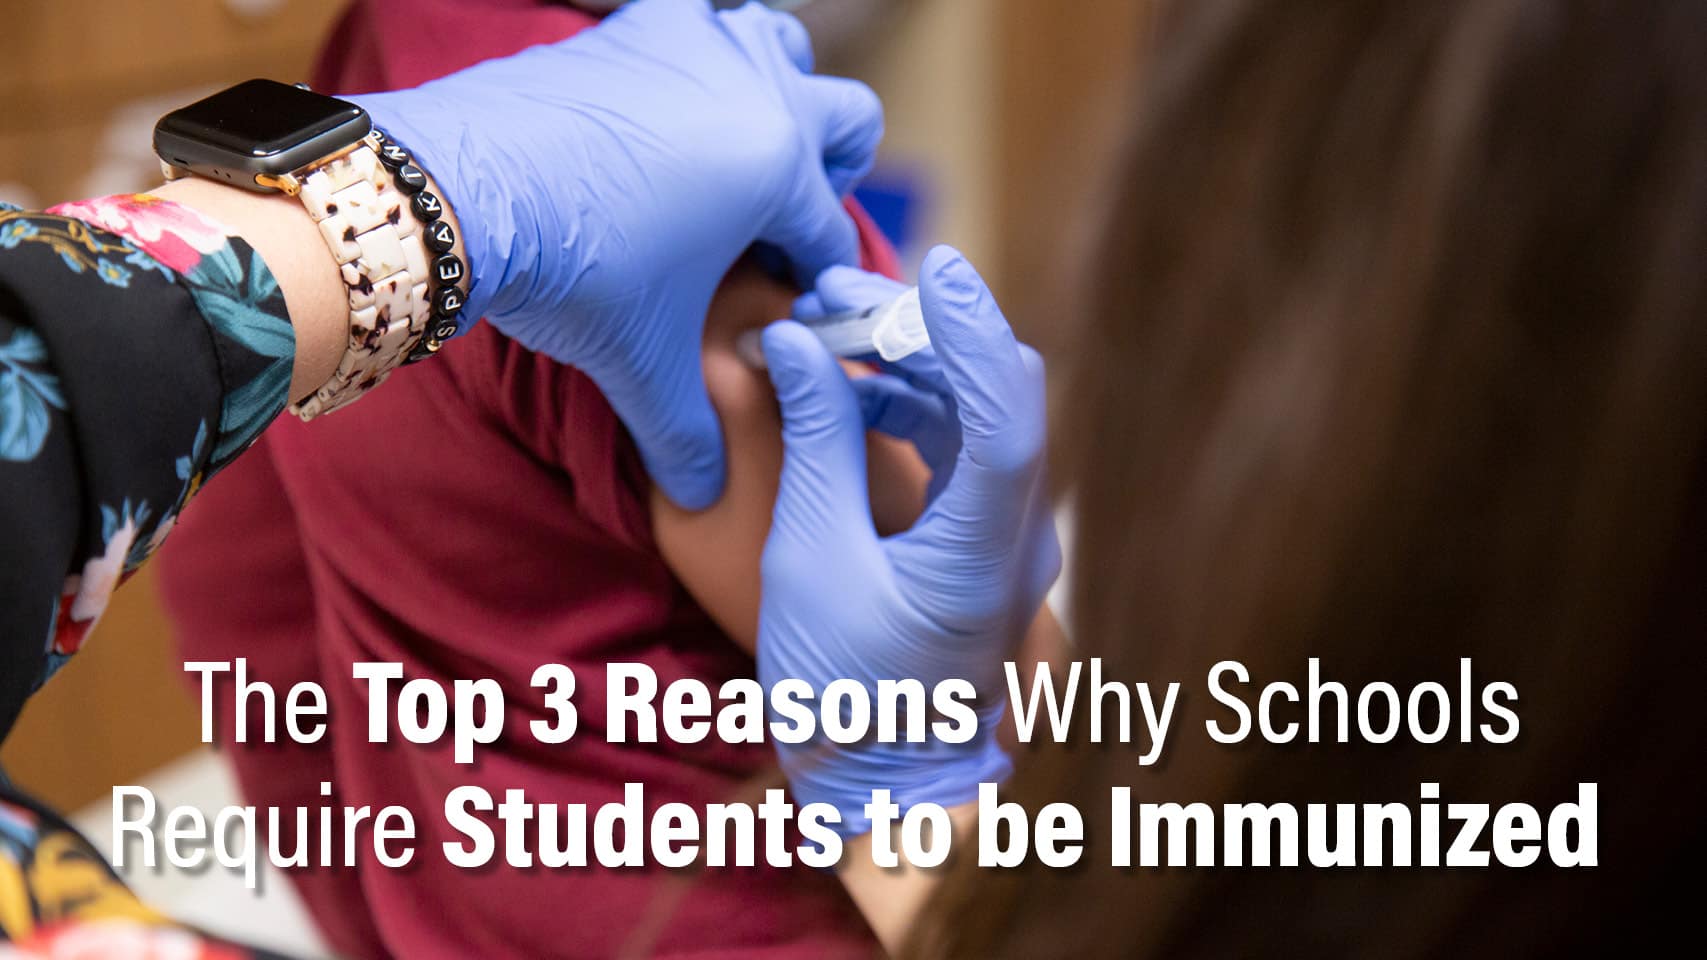 Richfield Medical Group of Minnesota presents " The Top 3 Reasons Why Schools Require Students to be Immunized "